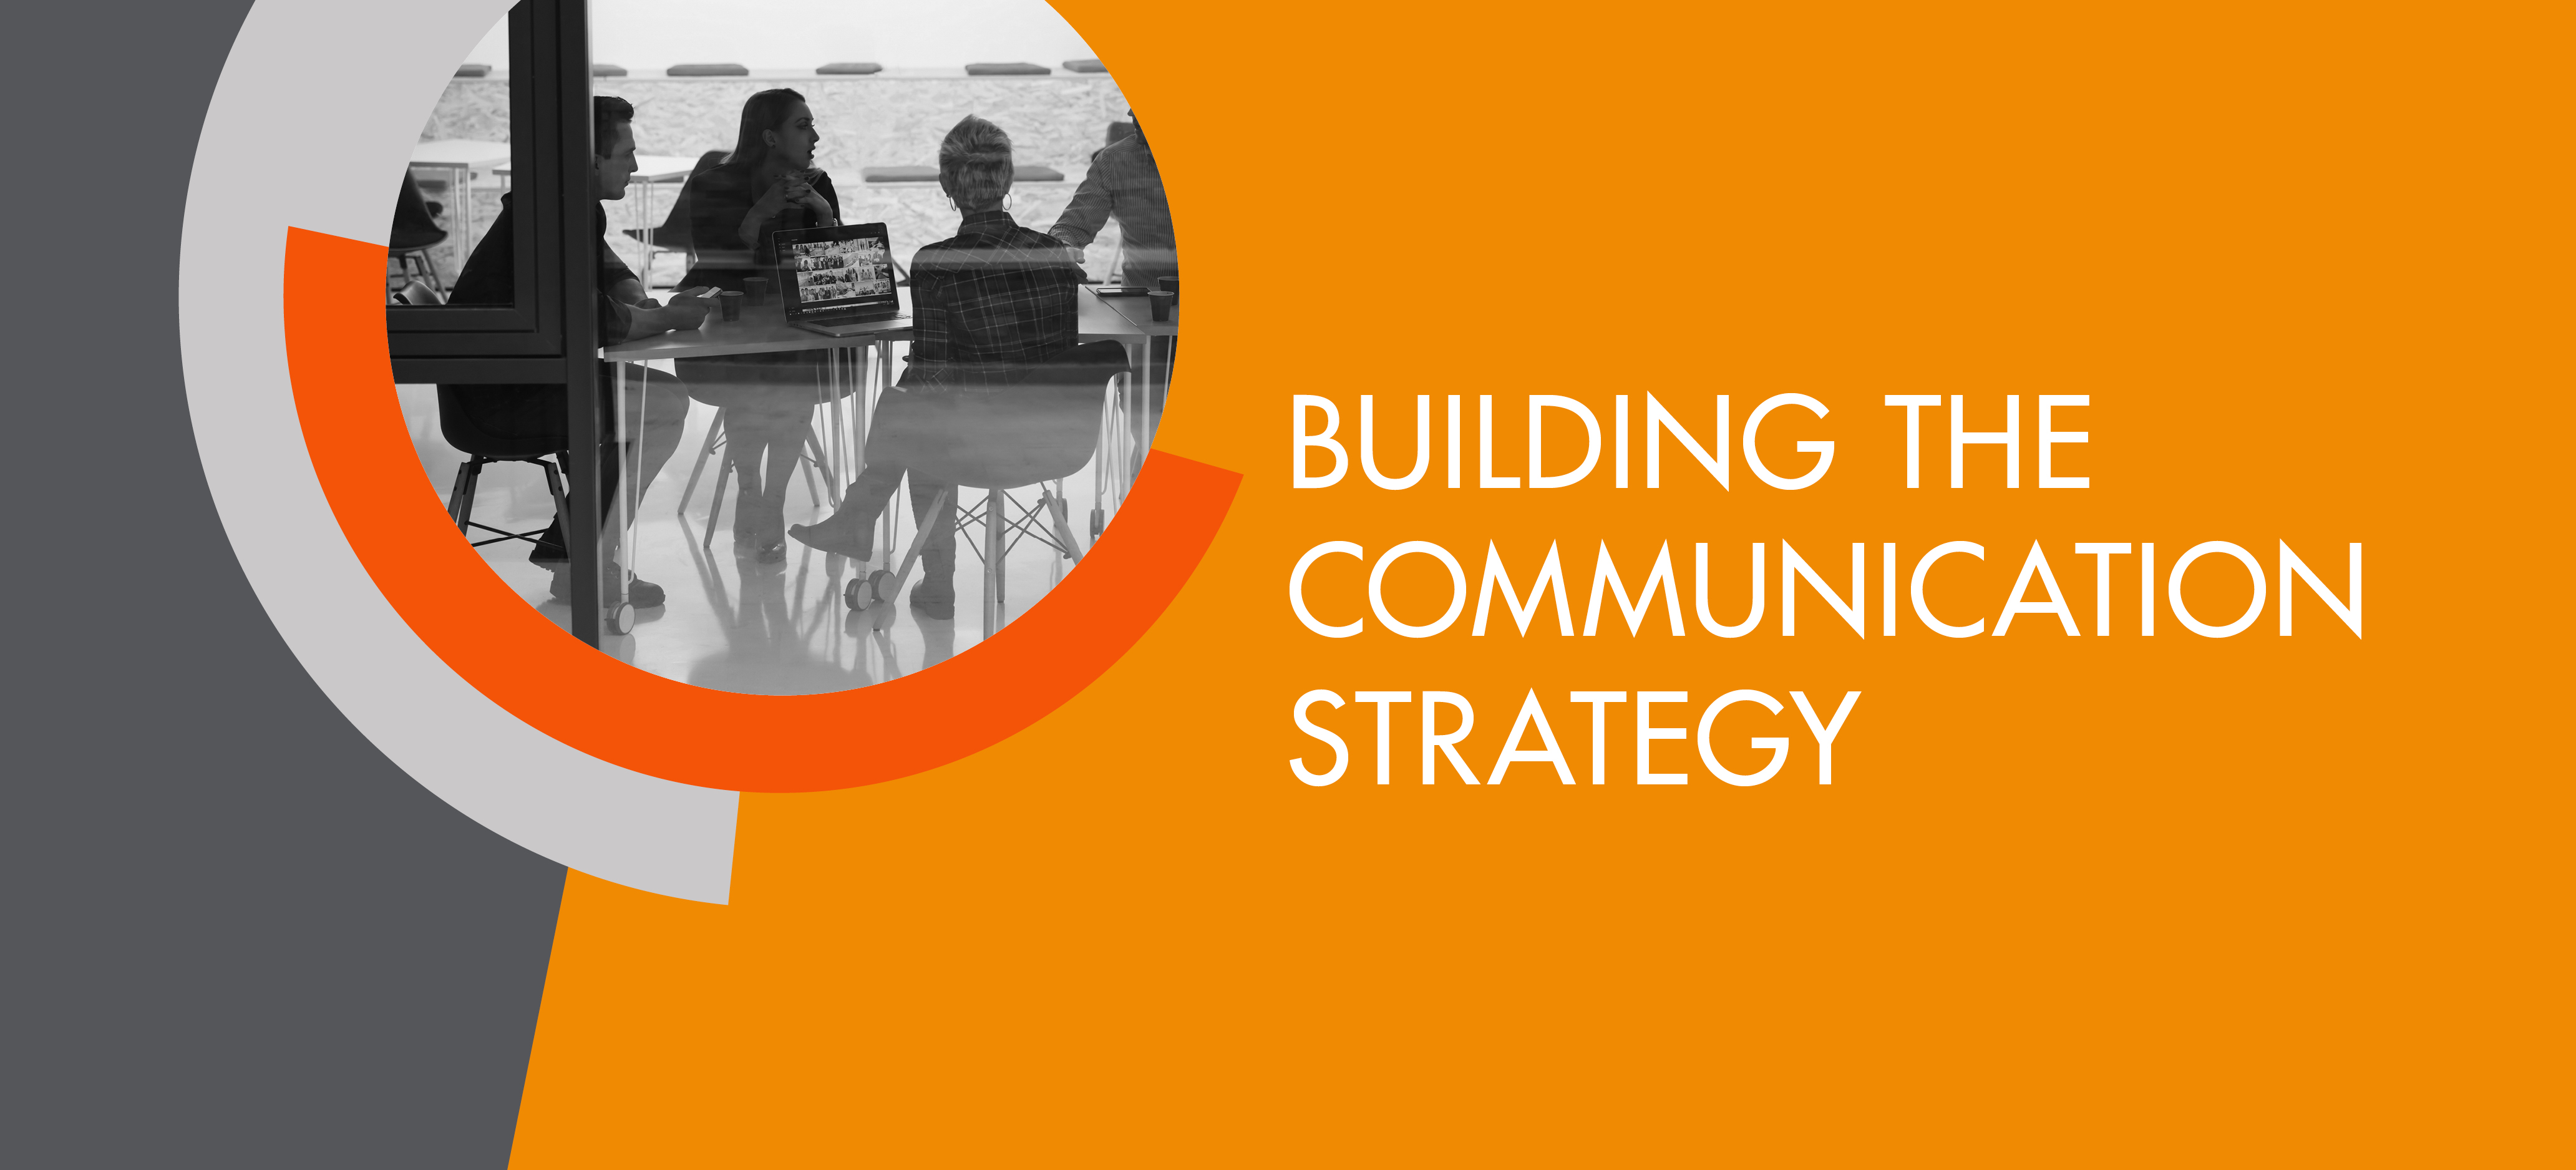 Building the COMMUNICATION STRATEGY